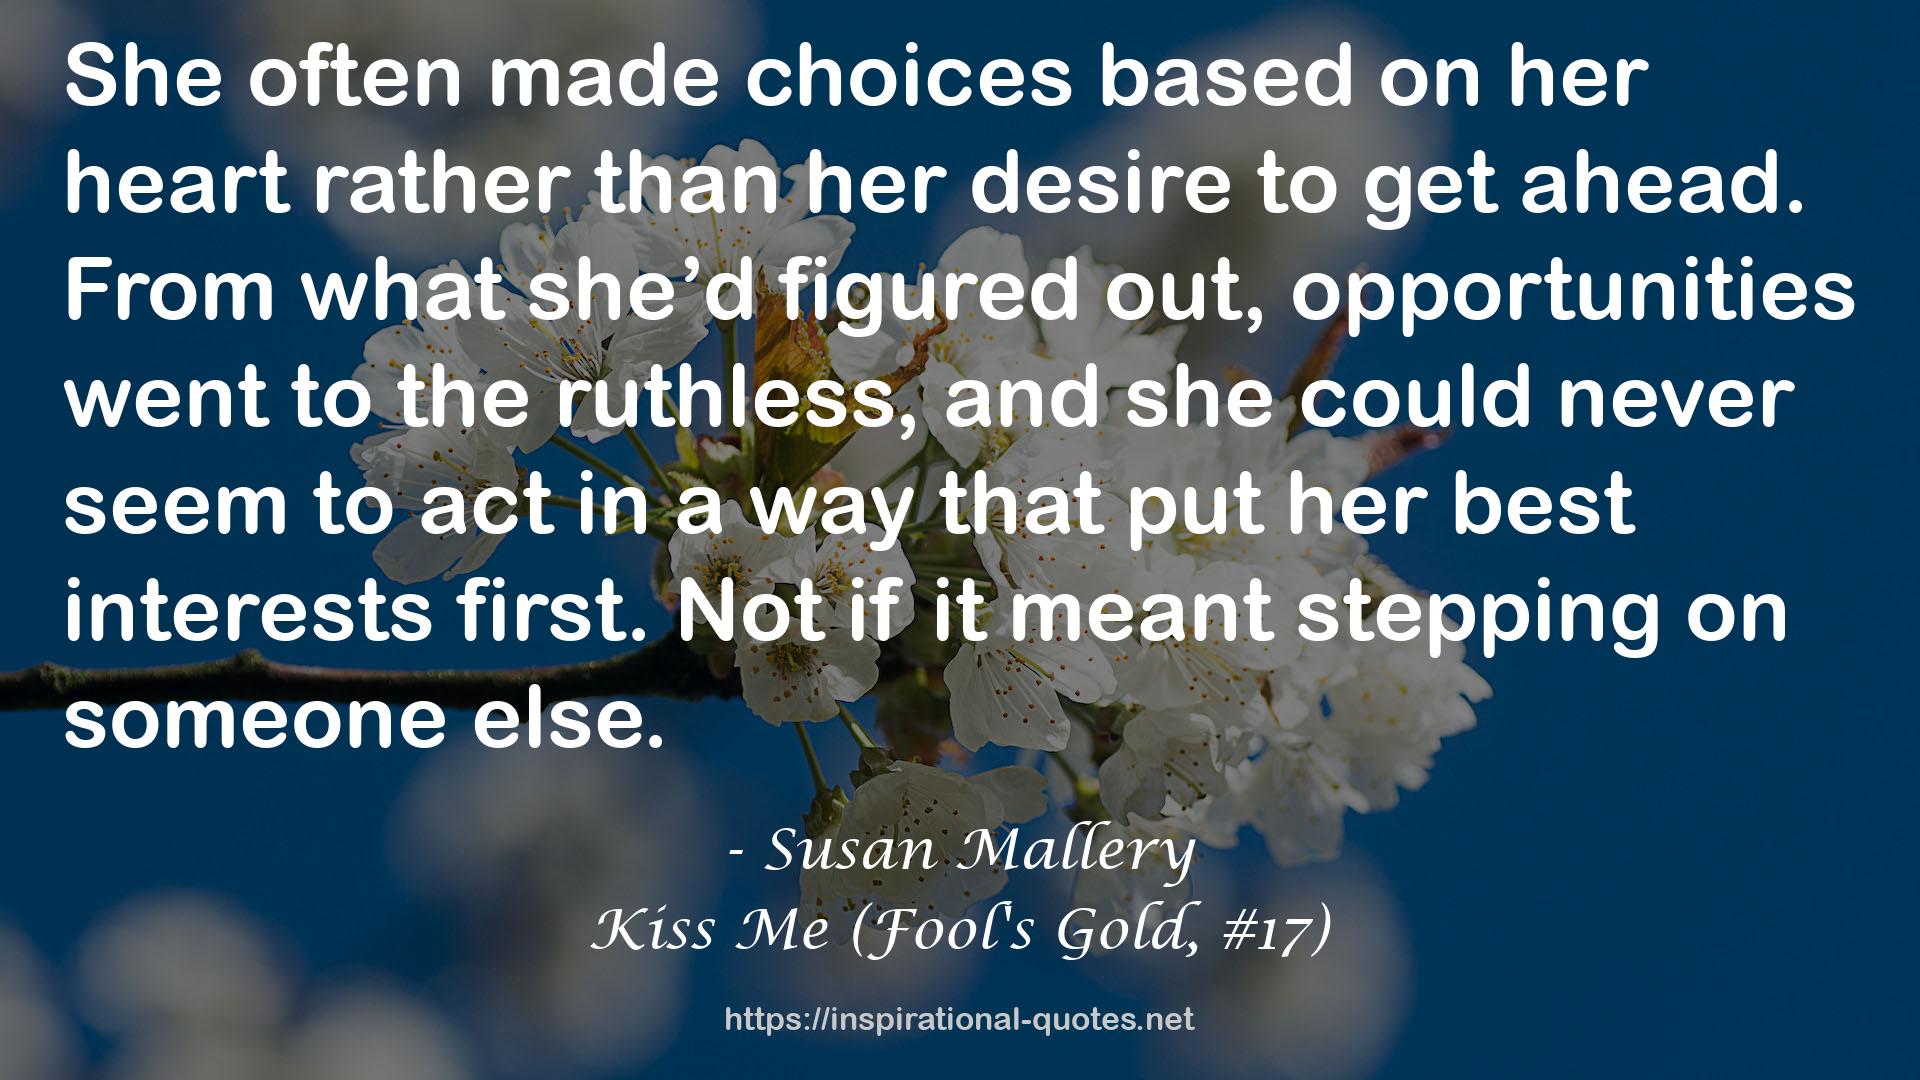 Kiss Me (Fool's Gold, #17) QUOTES